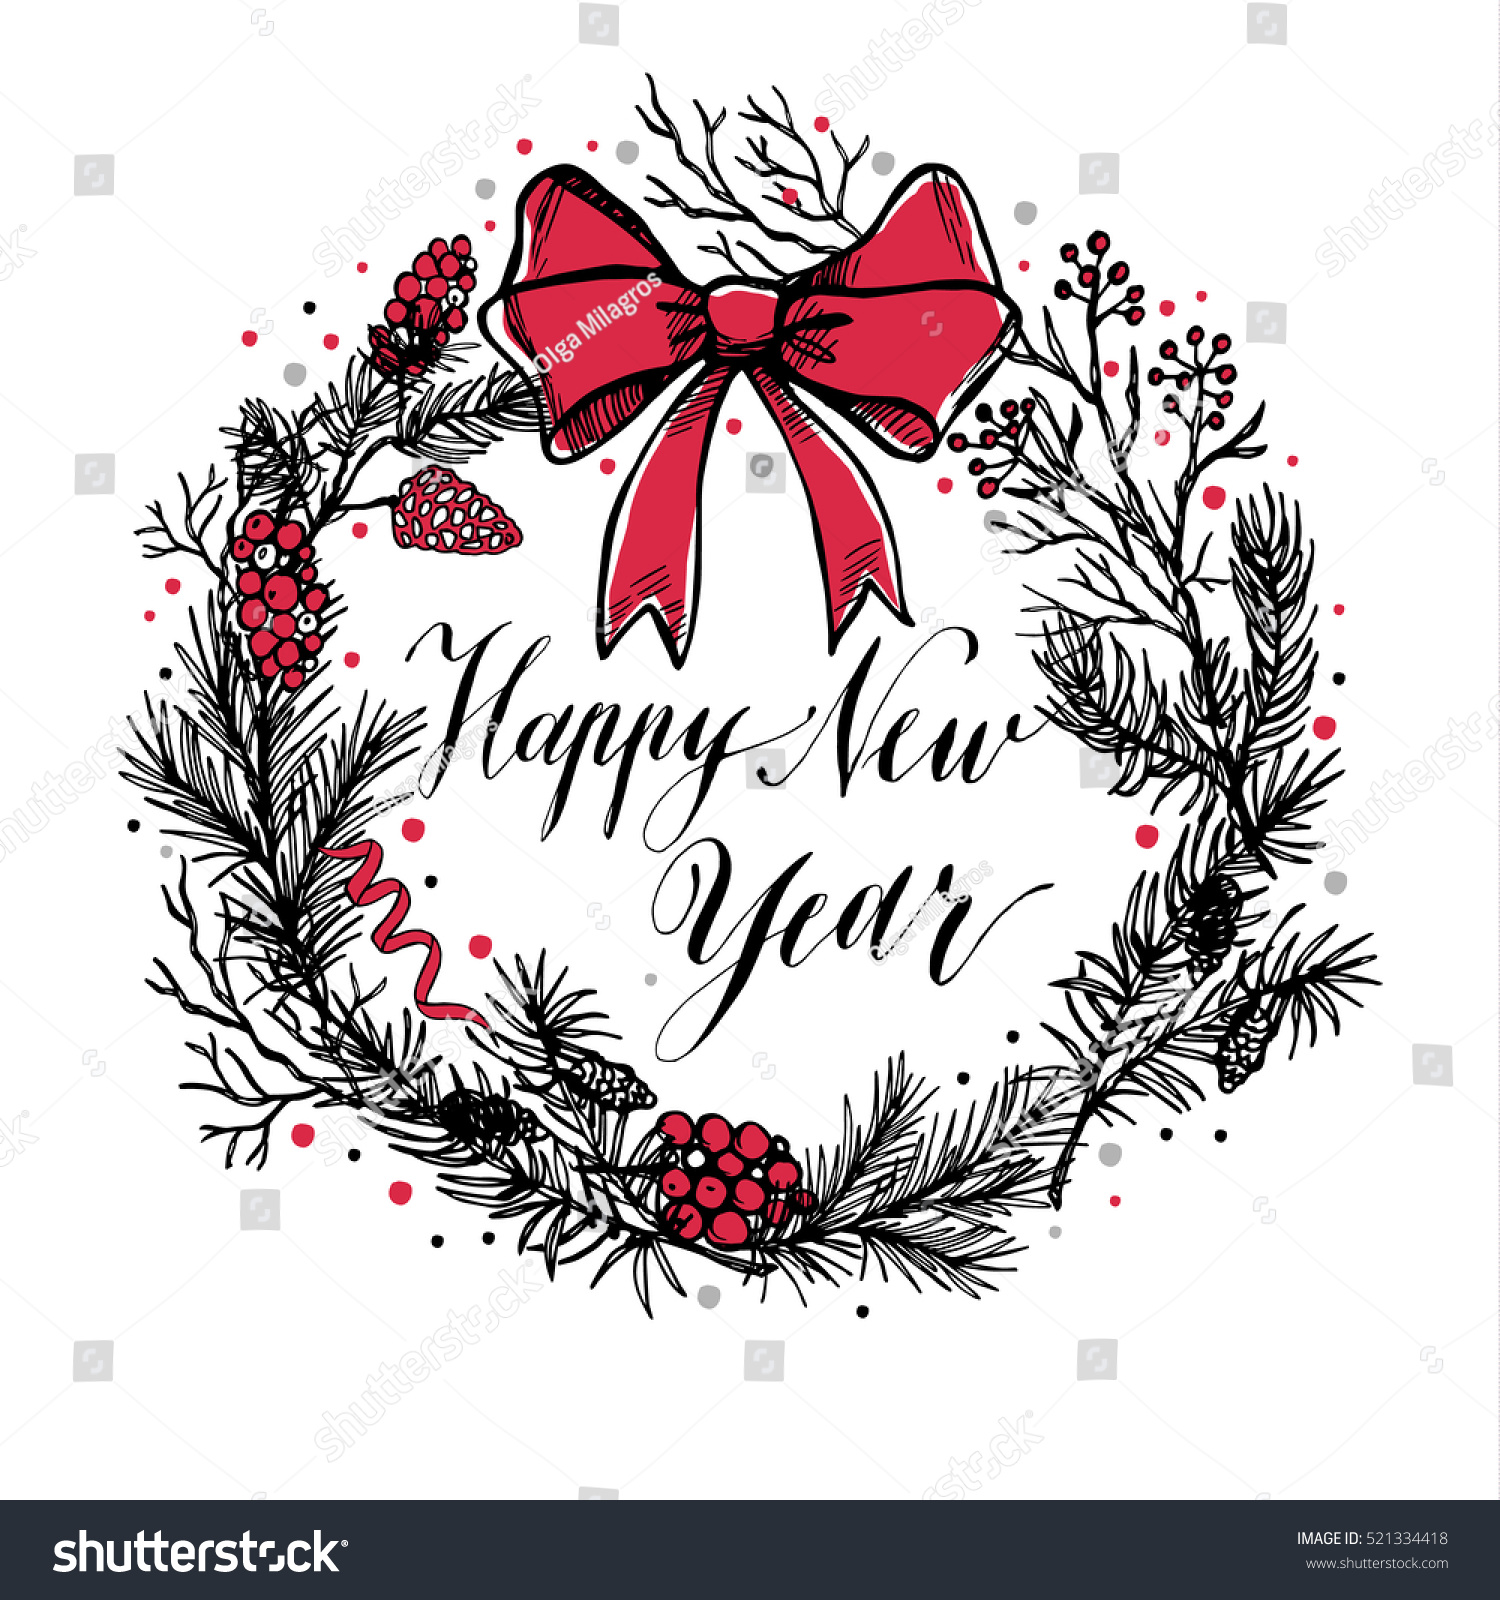 Hand drawn christmas wreath with red bow and calligraphic text Happy New Year